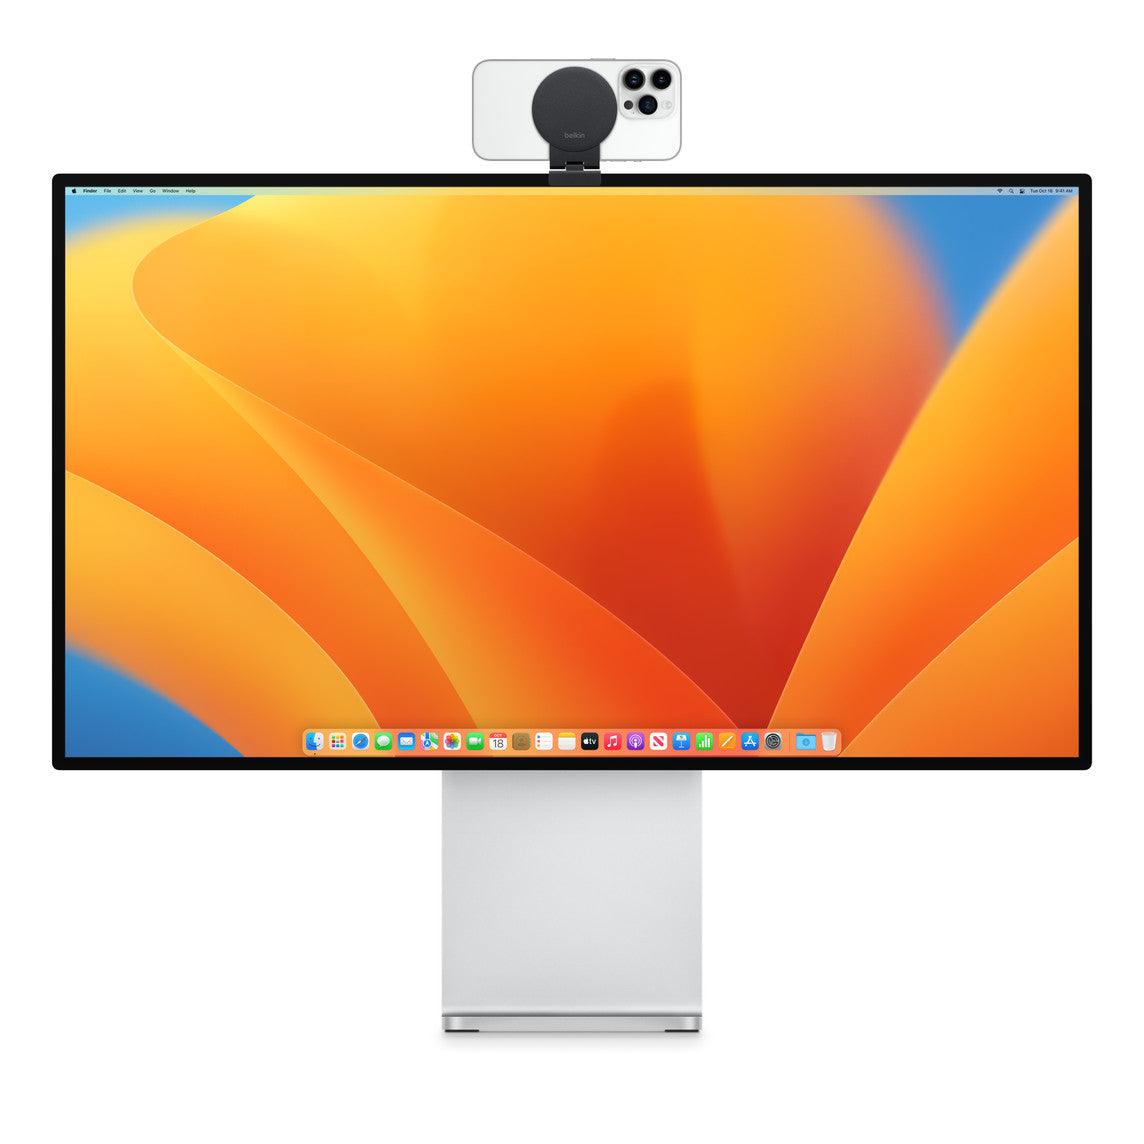 Belkin iPhone Mount with MagSafe for Mac desktops and displays - iGadget Store